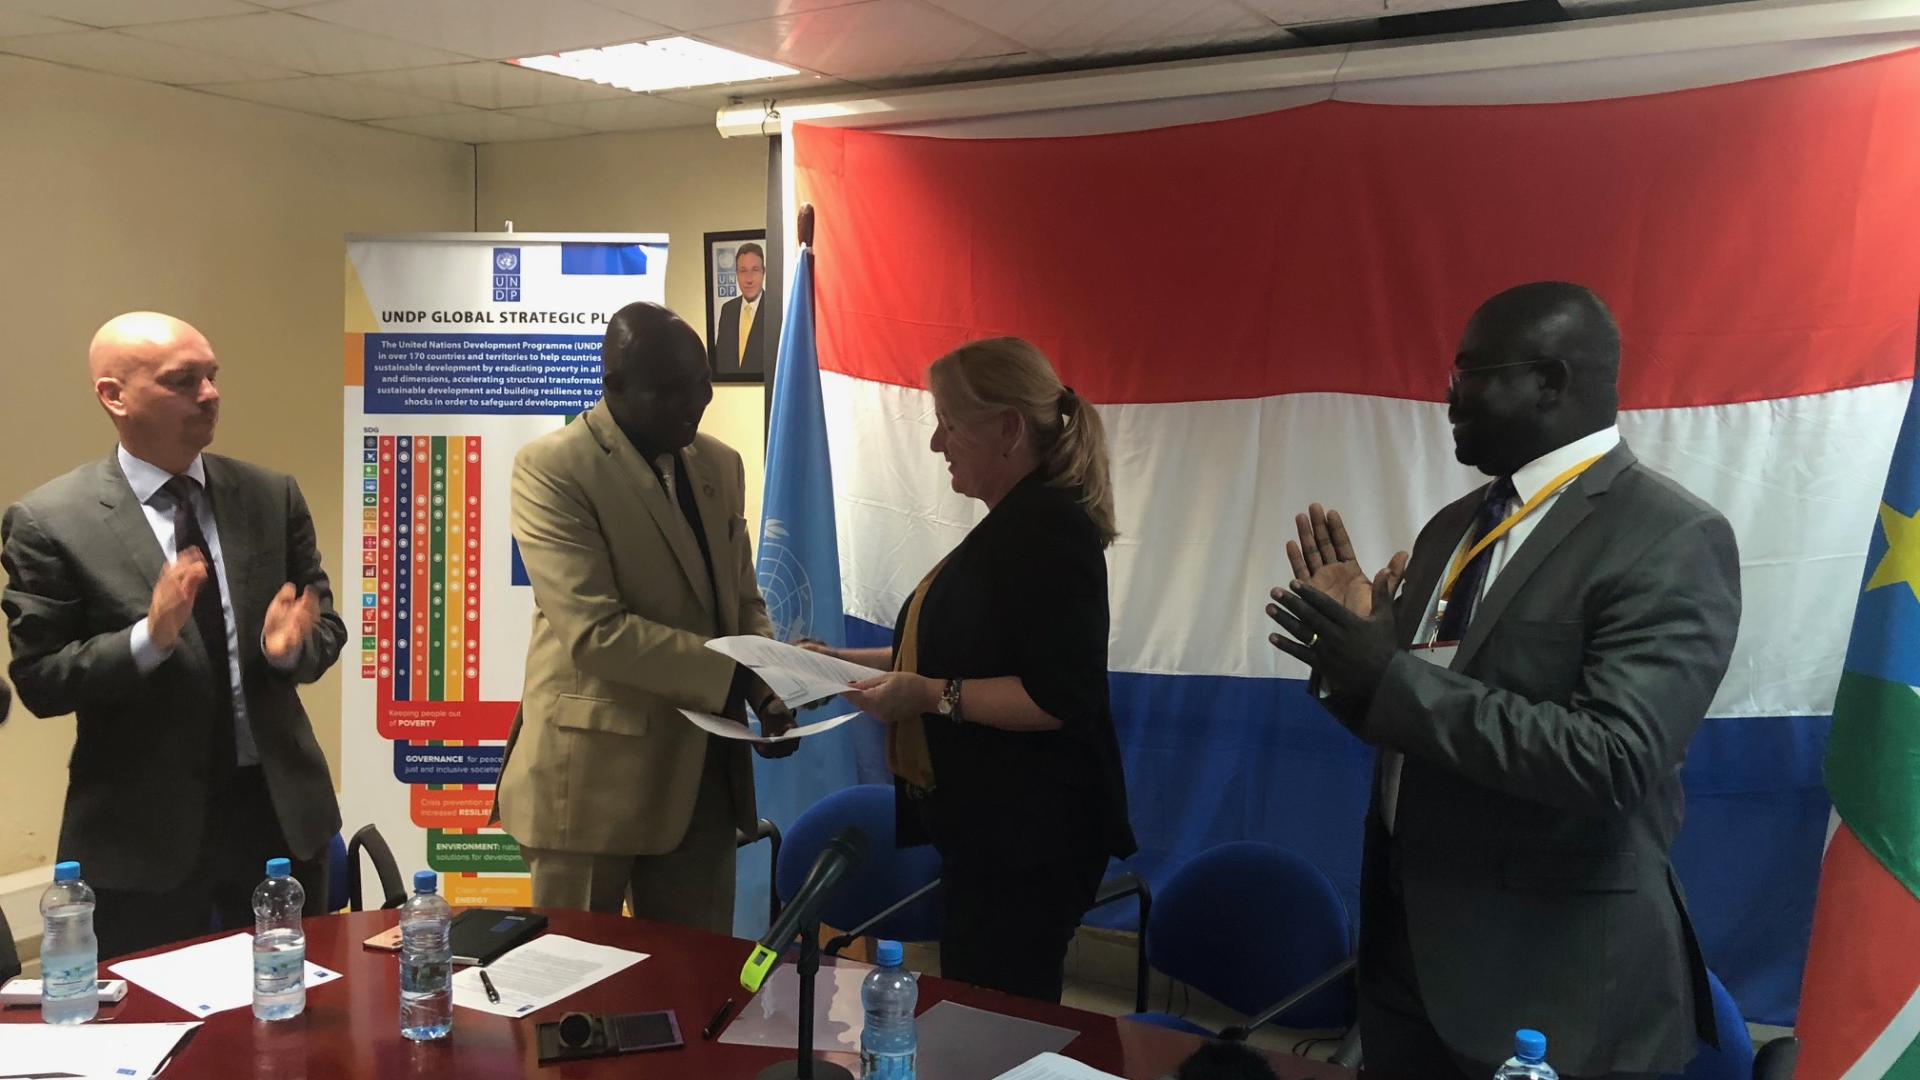 netherlands-and-undp-sign-new-agreement-to-support-youth-employment-and